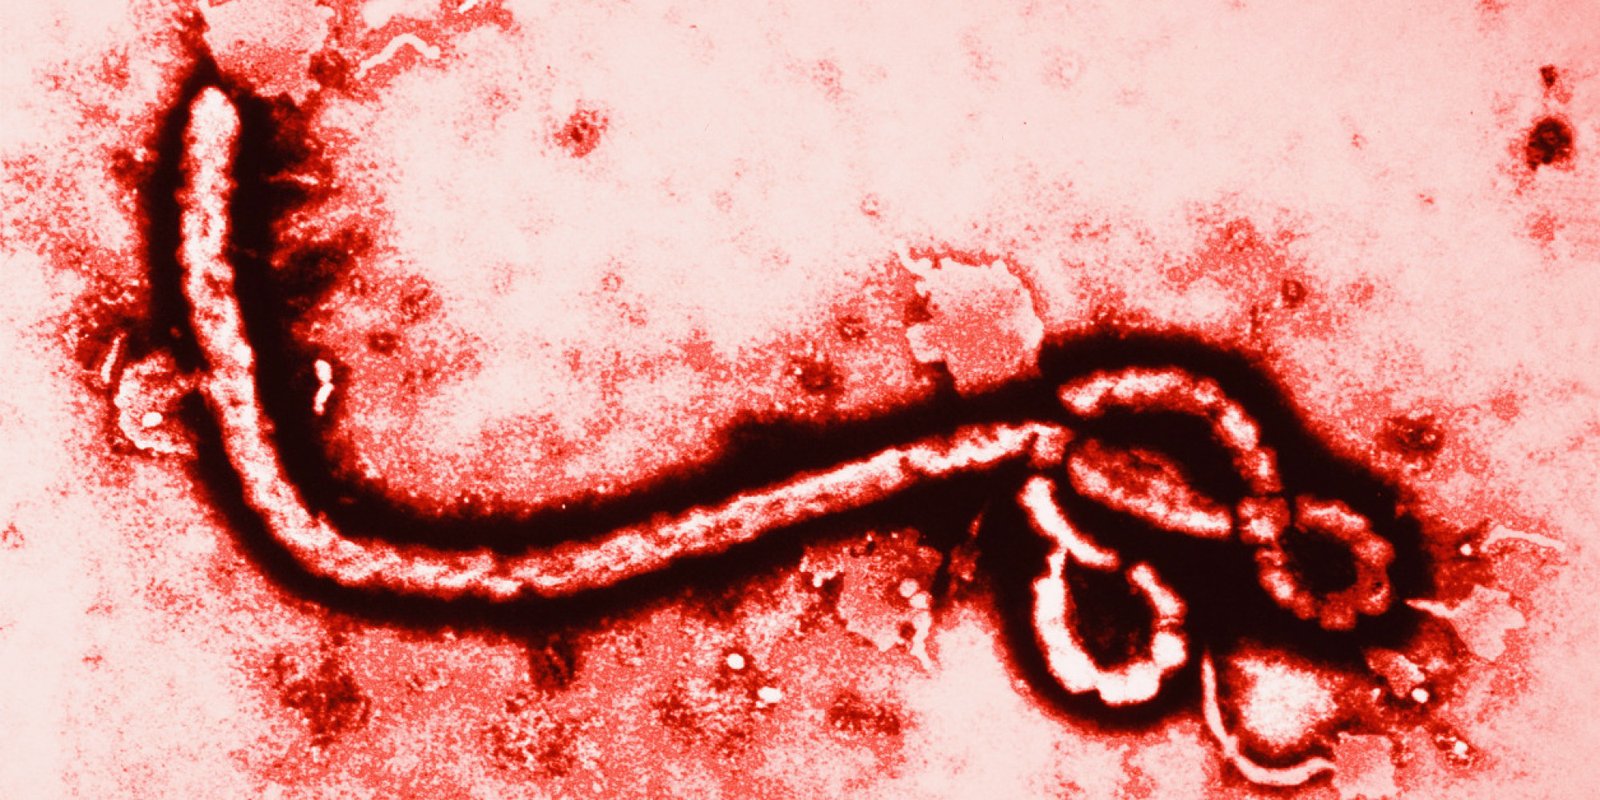 Indian Medical Association has been apprised to create awareness among its members on Ebola Virus Disease